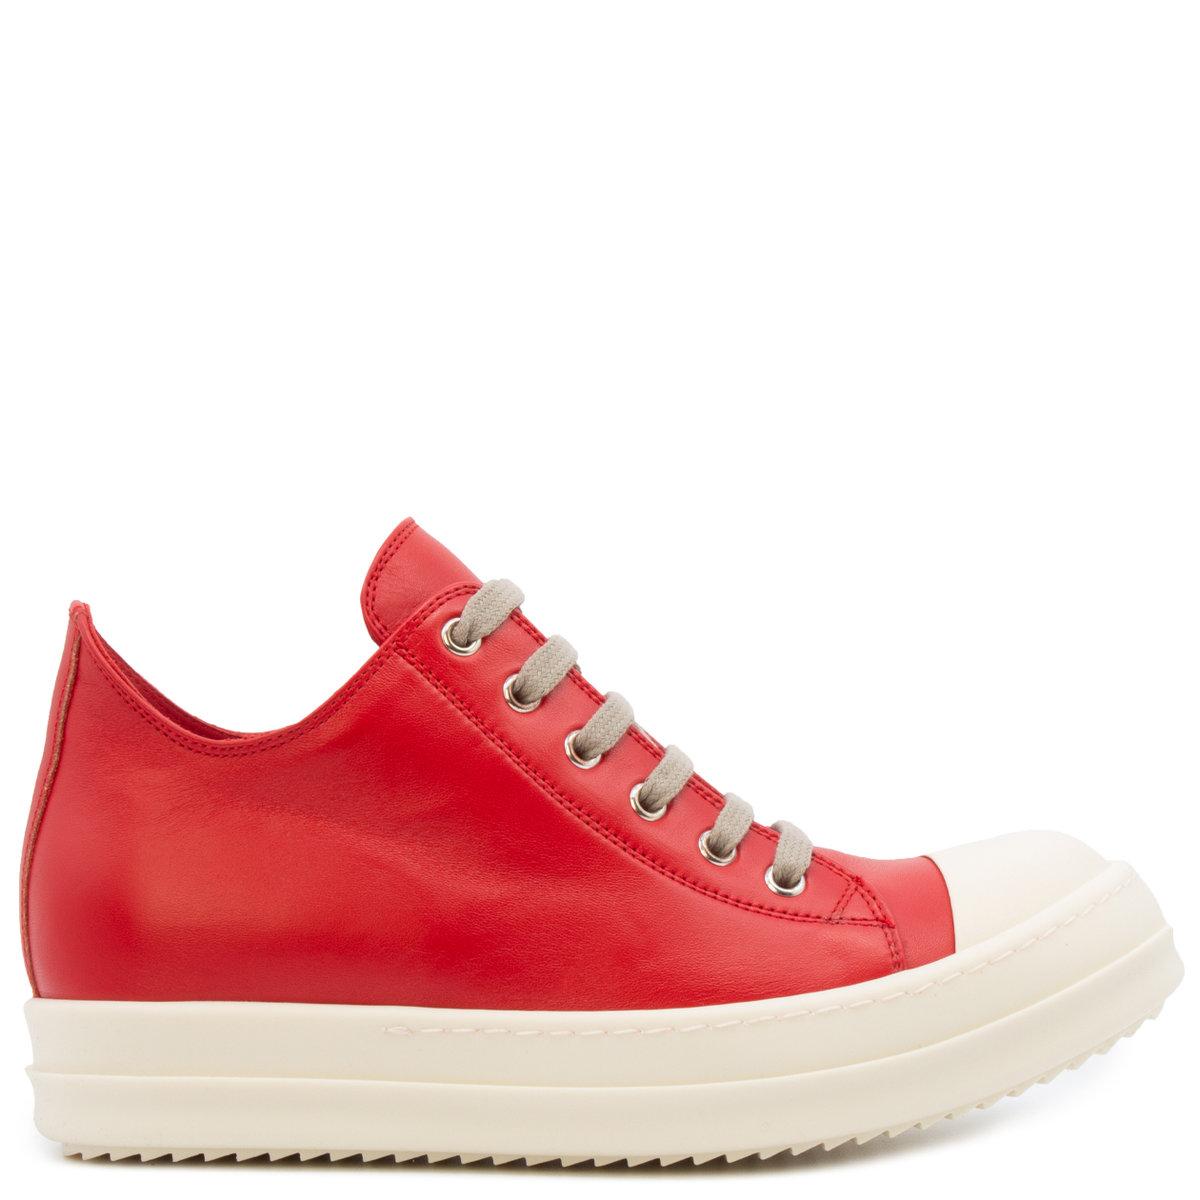 Rick Owens Leather Low Sneakers Red | Lyst